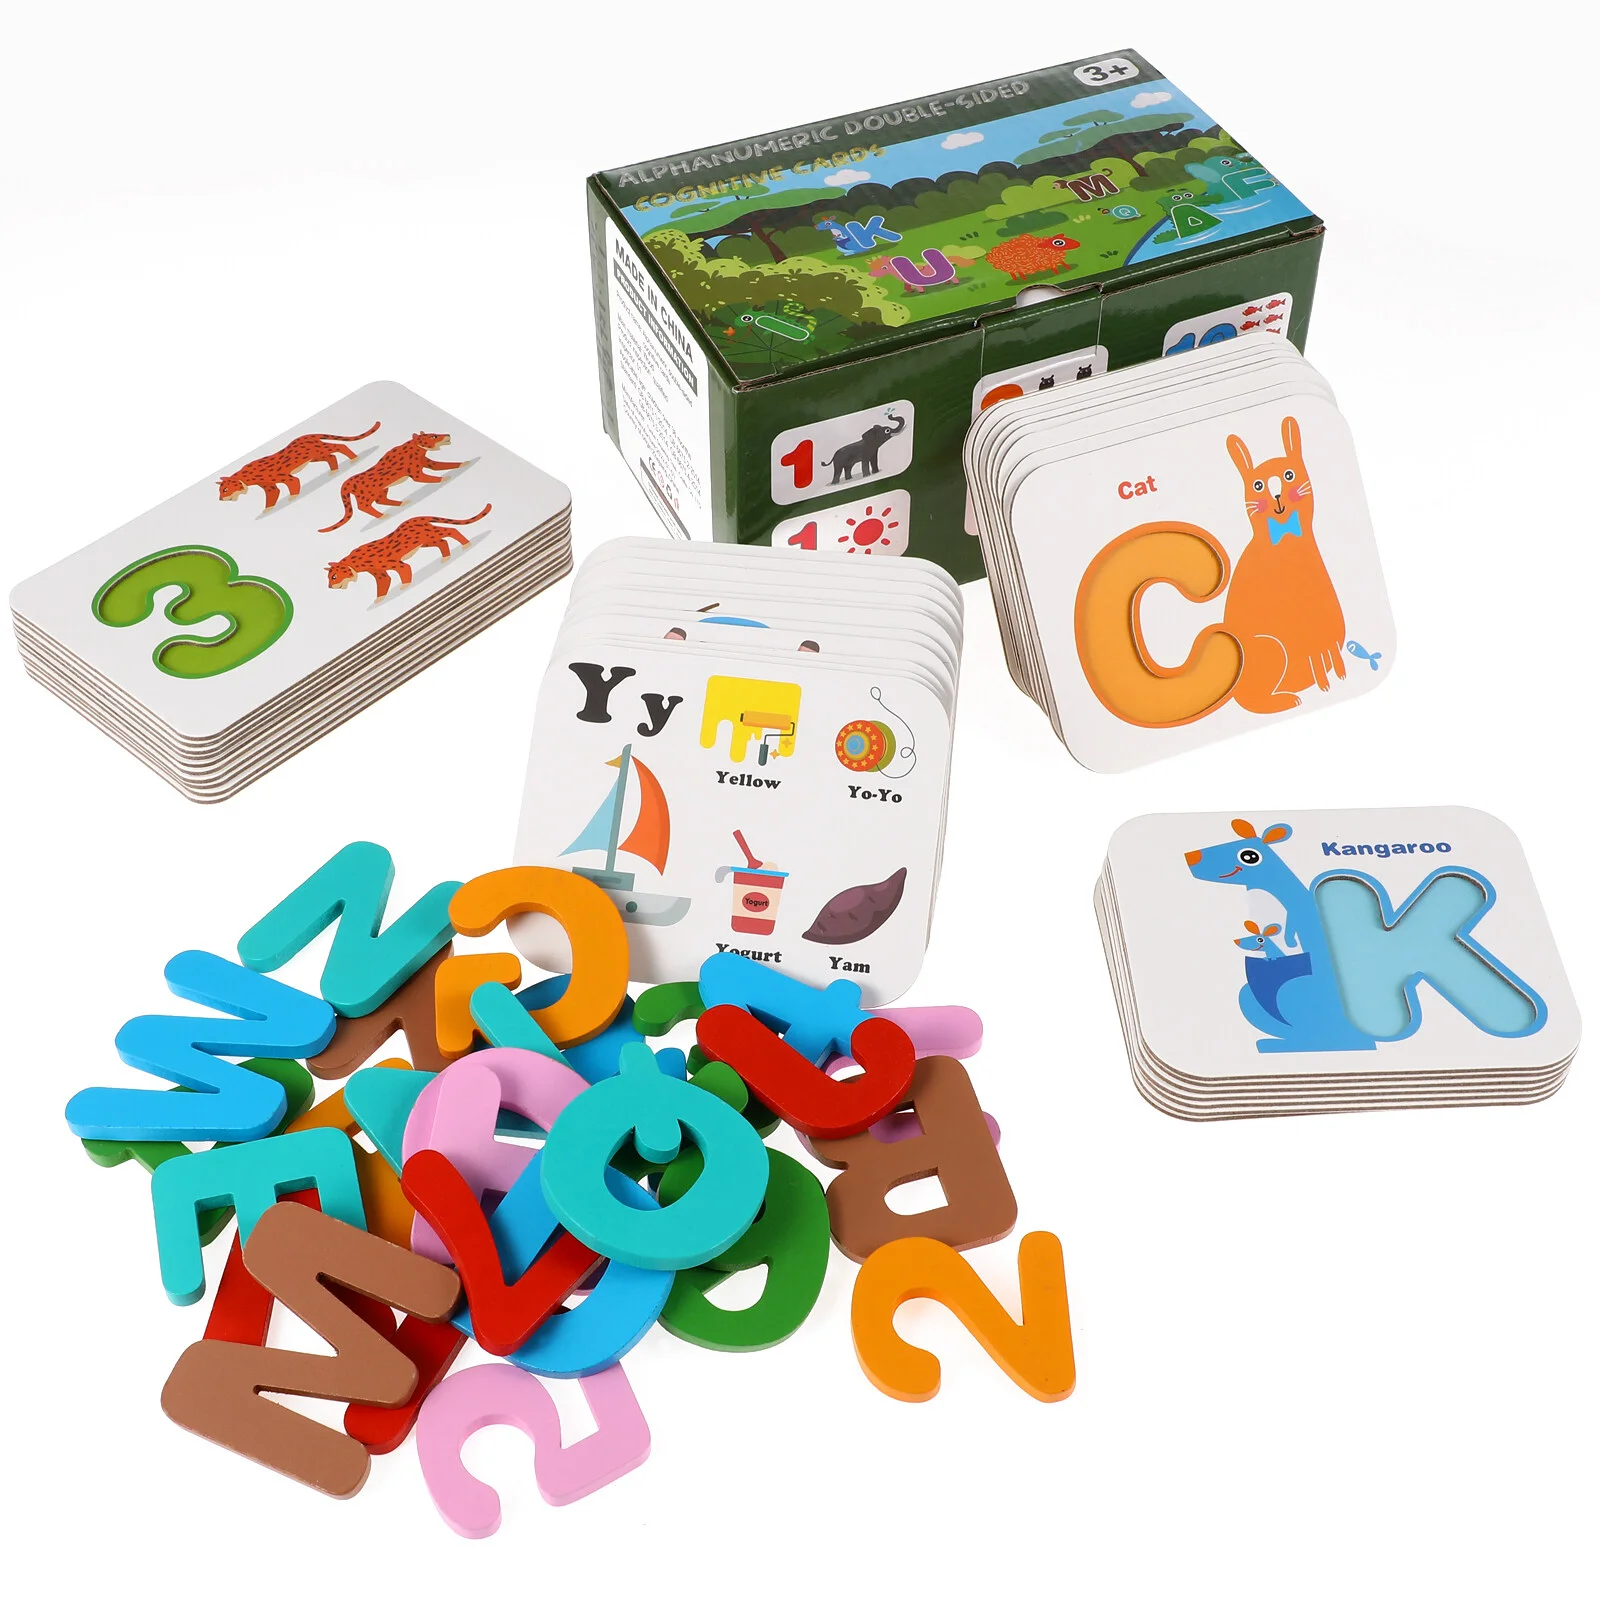 

Puzzles Flash Cards Toys Alphabet Toy Educational Learning Wooden Toddlers Montessori Spelling Abc Animal Game Preschool Number